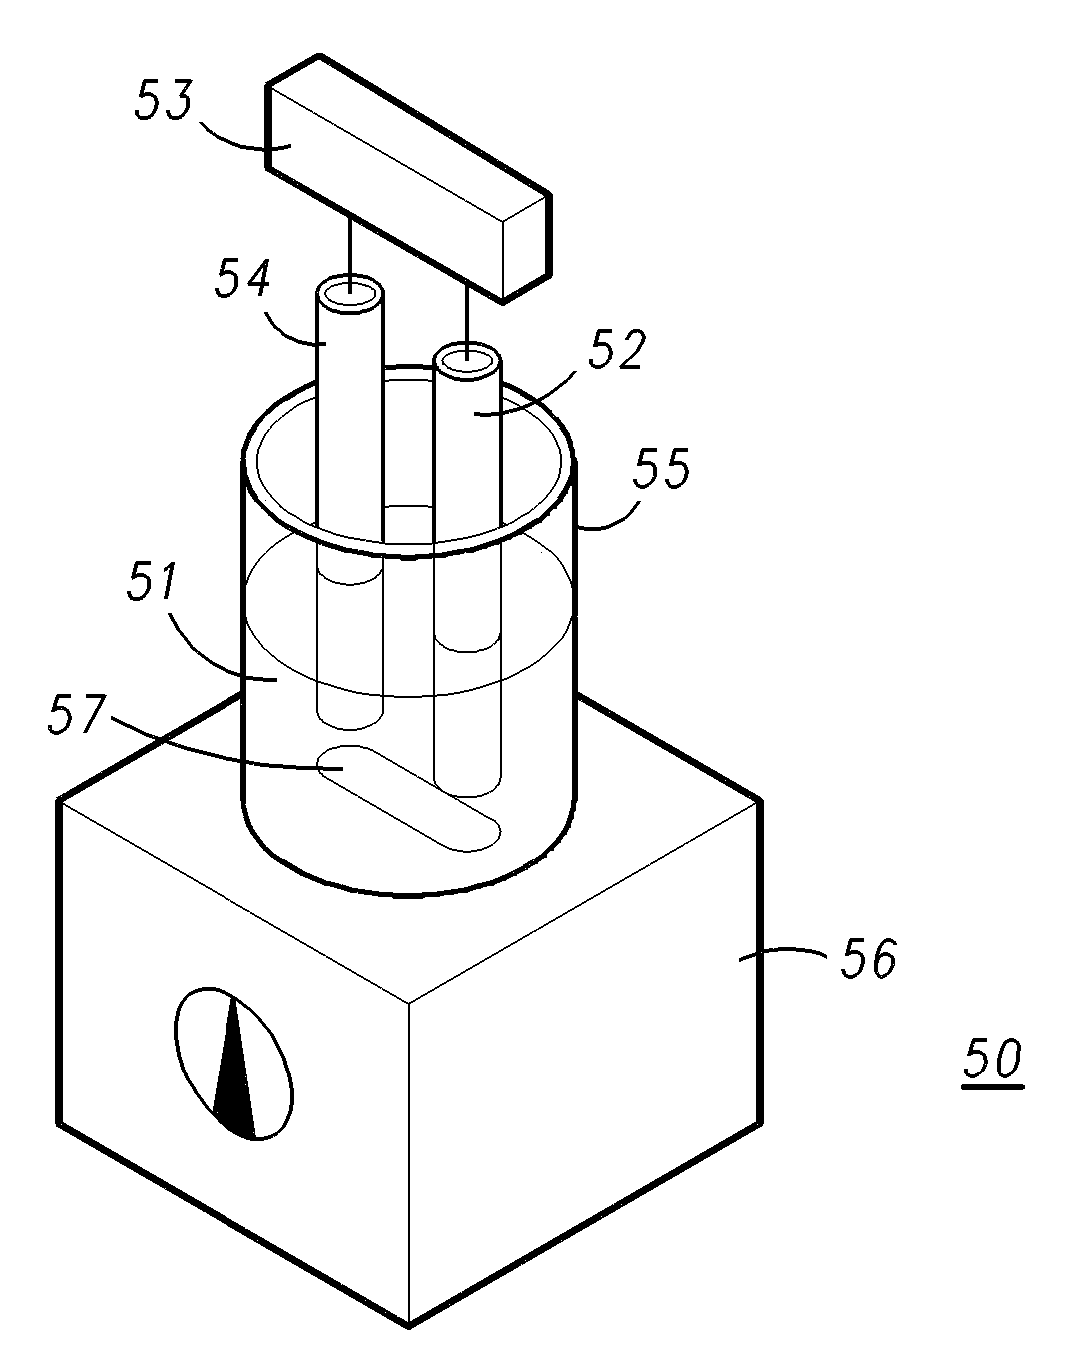 Two-step molecular surface imprinting method for making a sensor